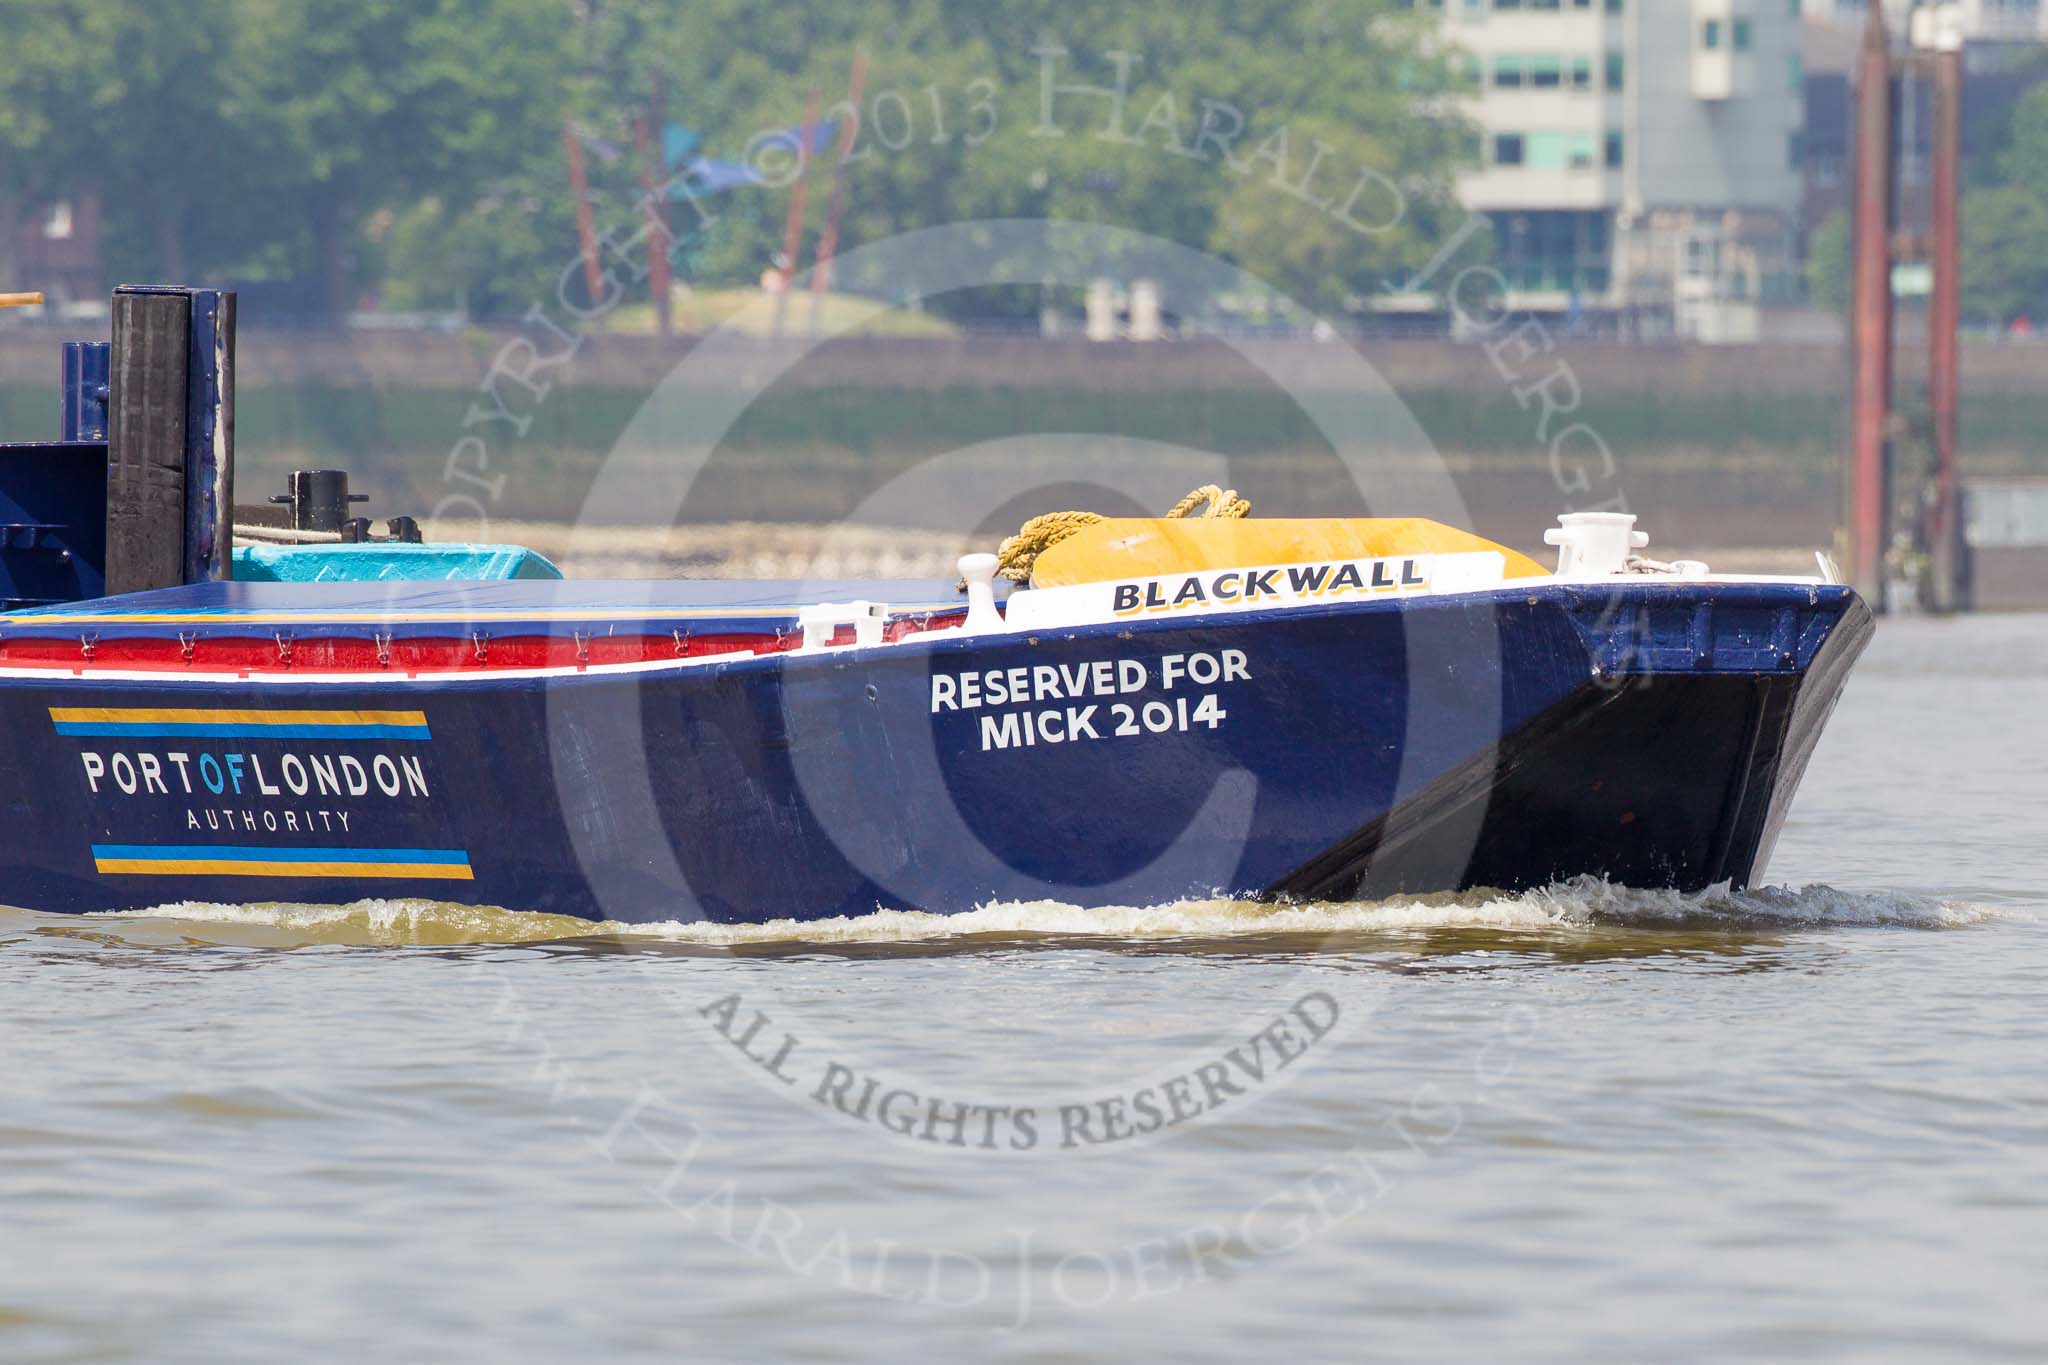 TOW River Thames Barge Driving Race 2013: Another competing barge, "Blackwall" by the Port of London Authority, is pushed to the start of the race..
River Thames between Greenwich and Westminster,
London,

United Kingdom,
on 13 July 2013 at 11:36, image #30